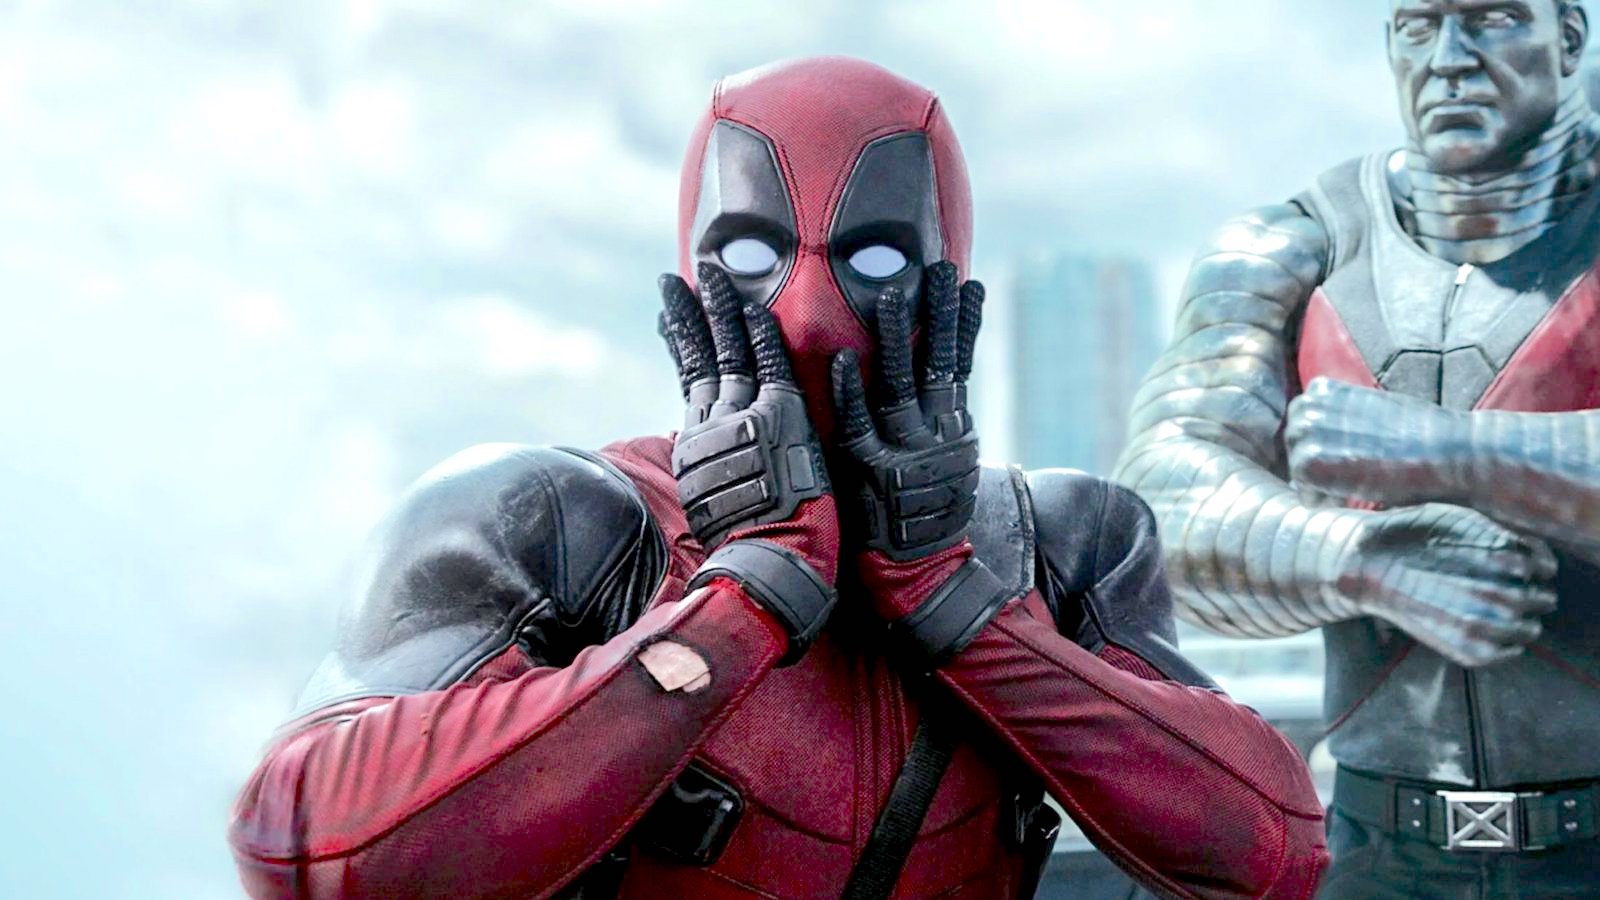 Deadpool surprised with hands on face